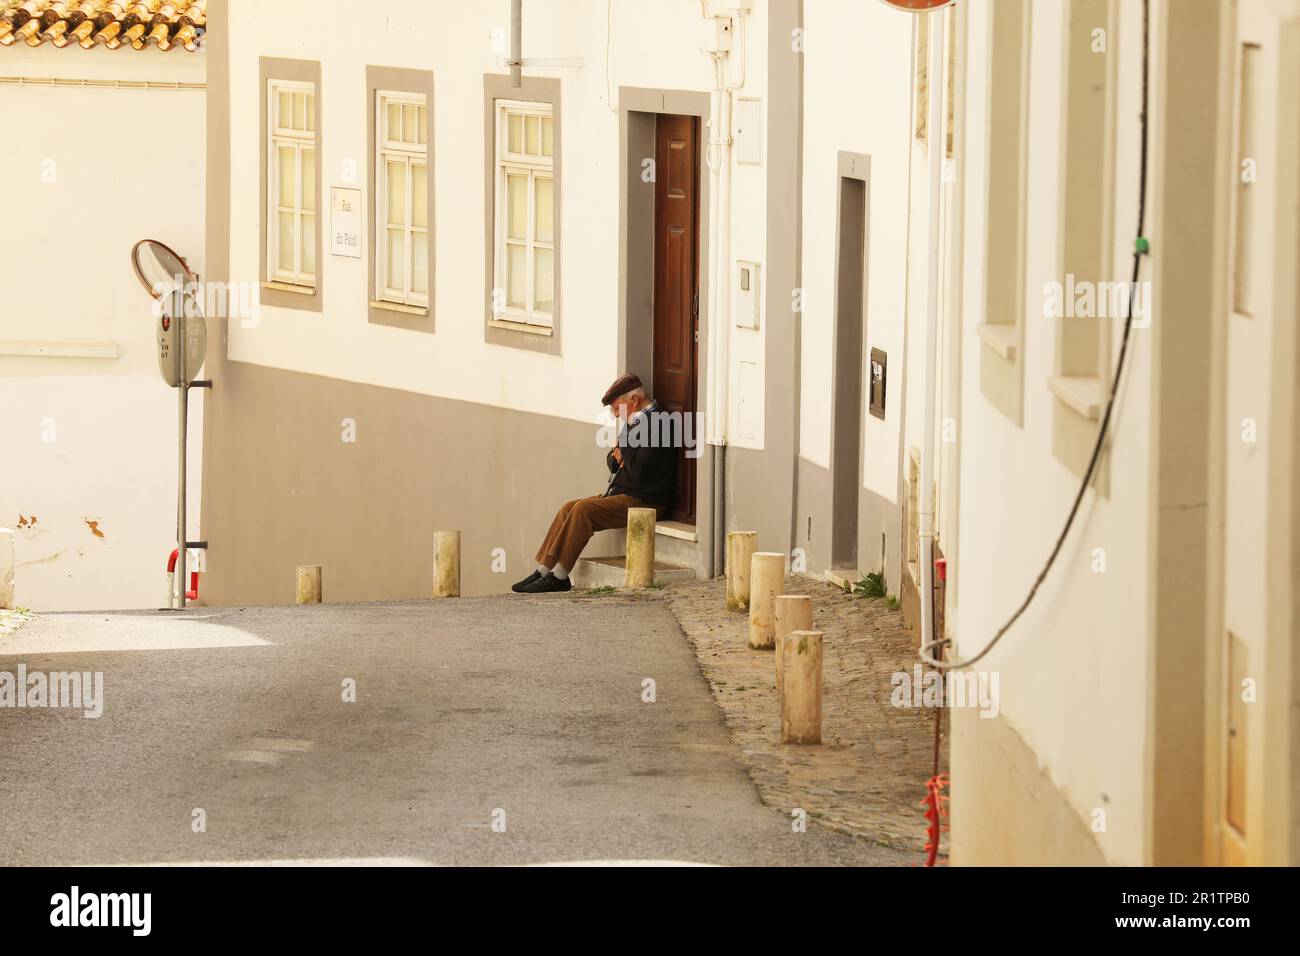 Old man sitting on a doorstep, Old Town, Lagos, Algarve, Portugal Stock Photo